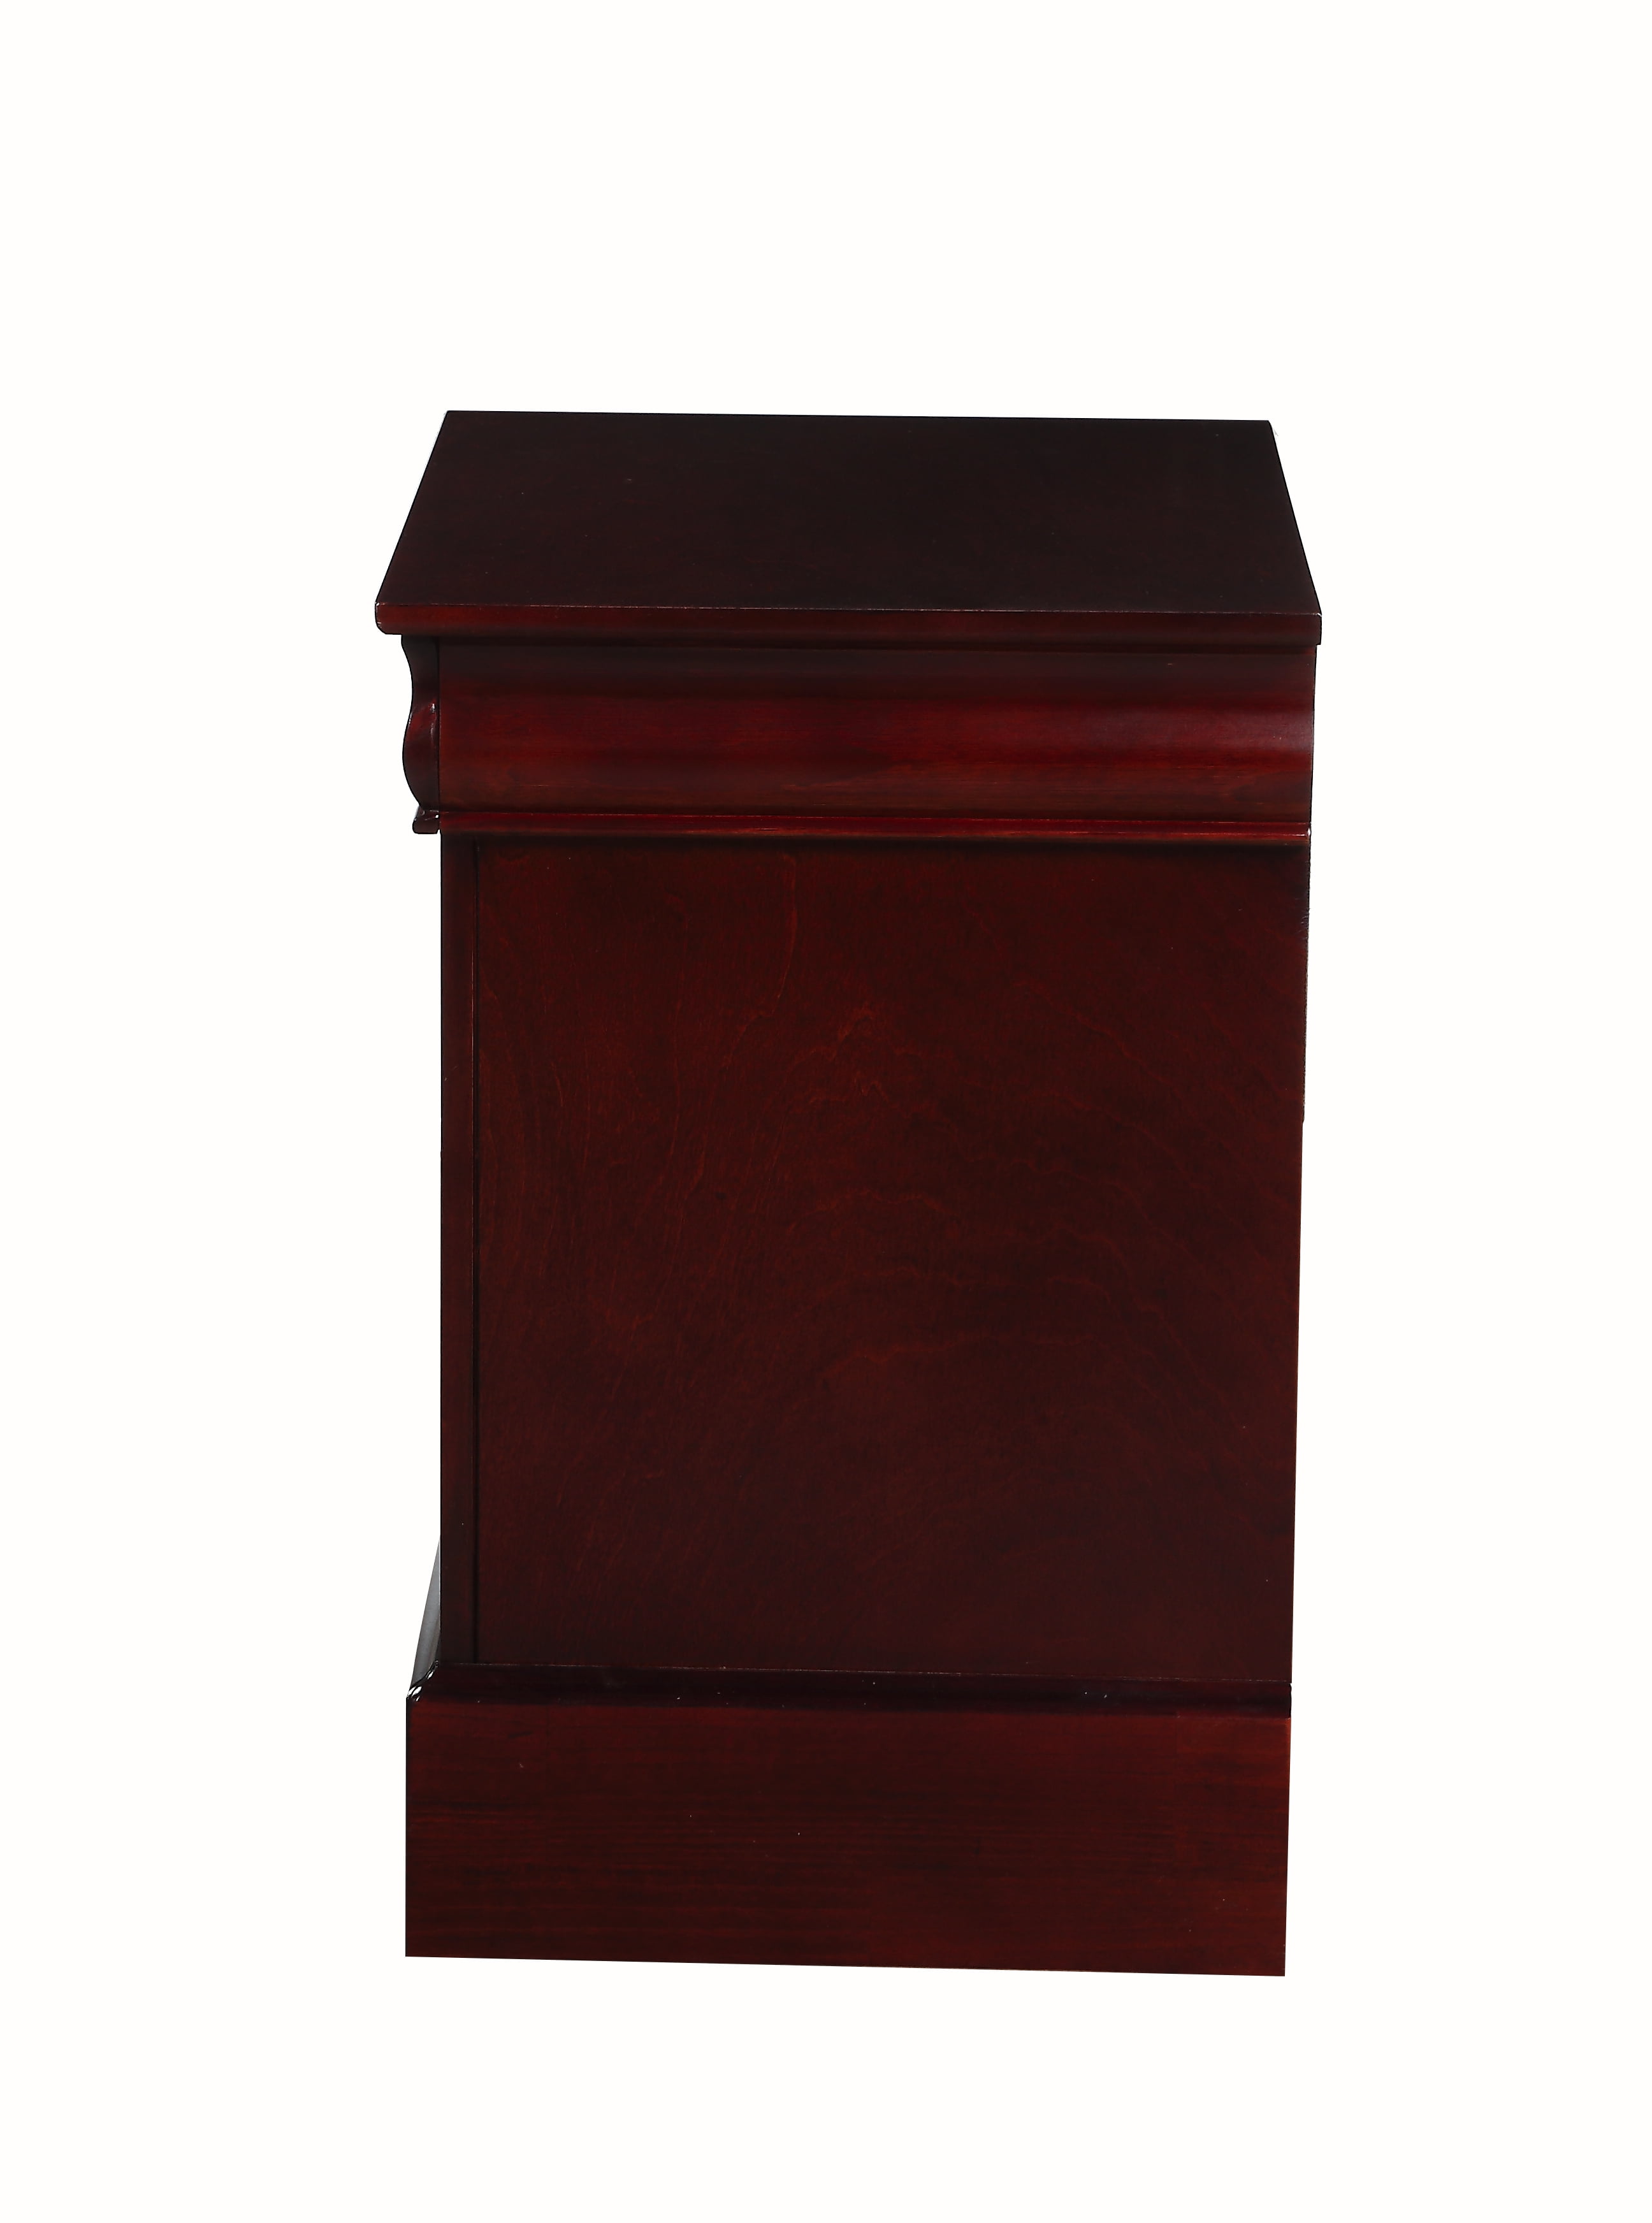 Sale Acme Furniture Louis Philippe III Chest in Cherry 19526